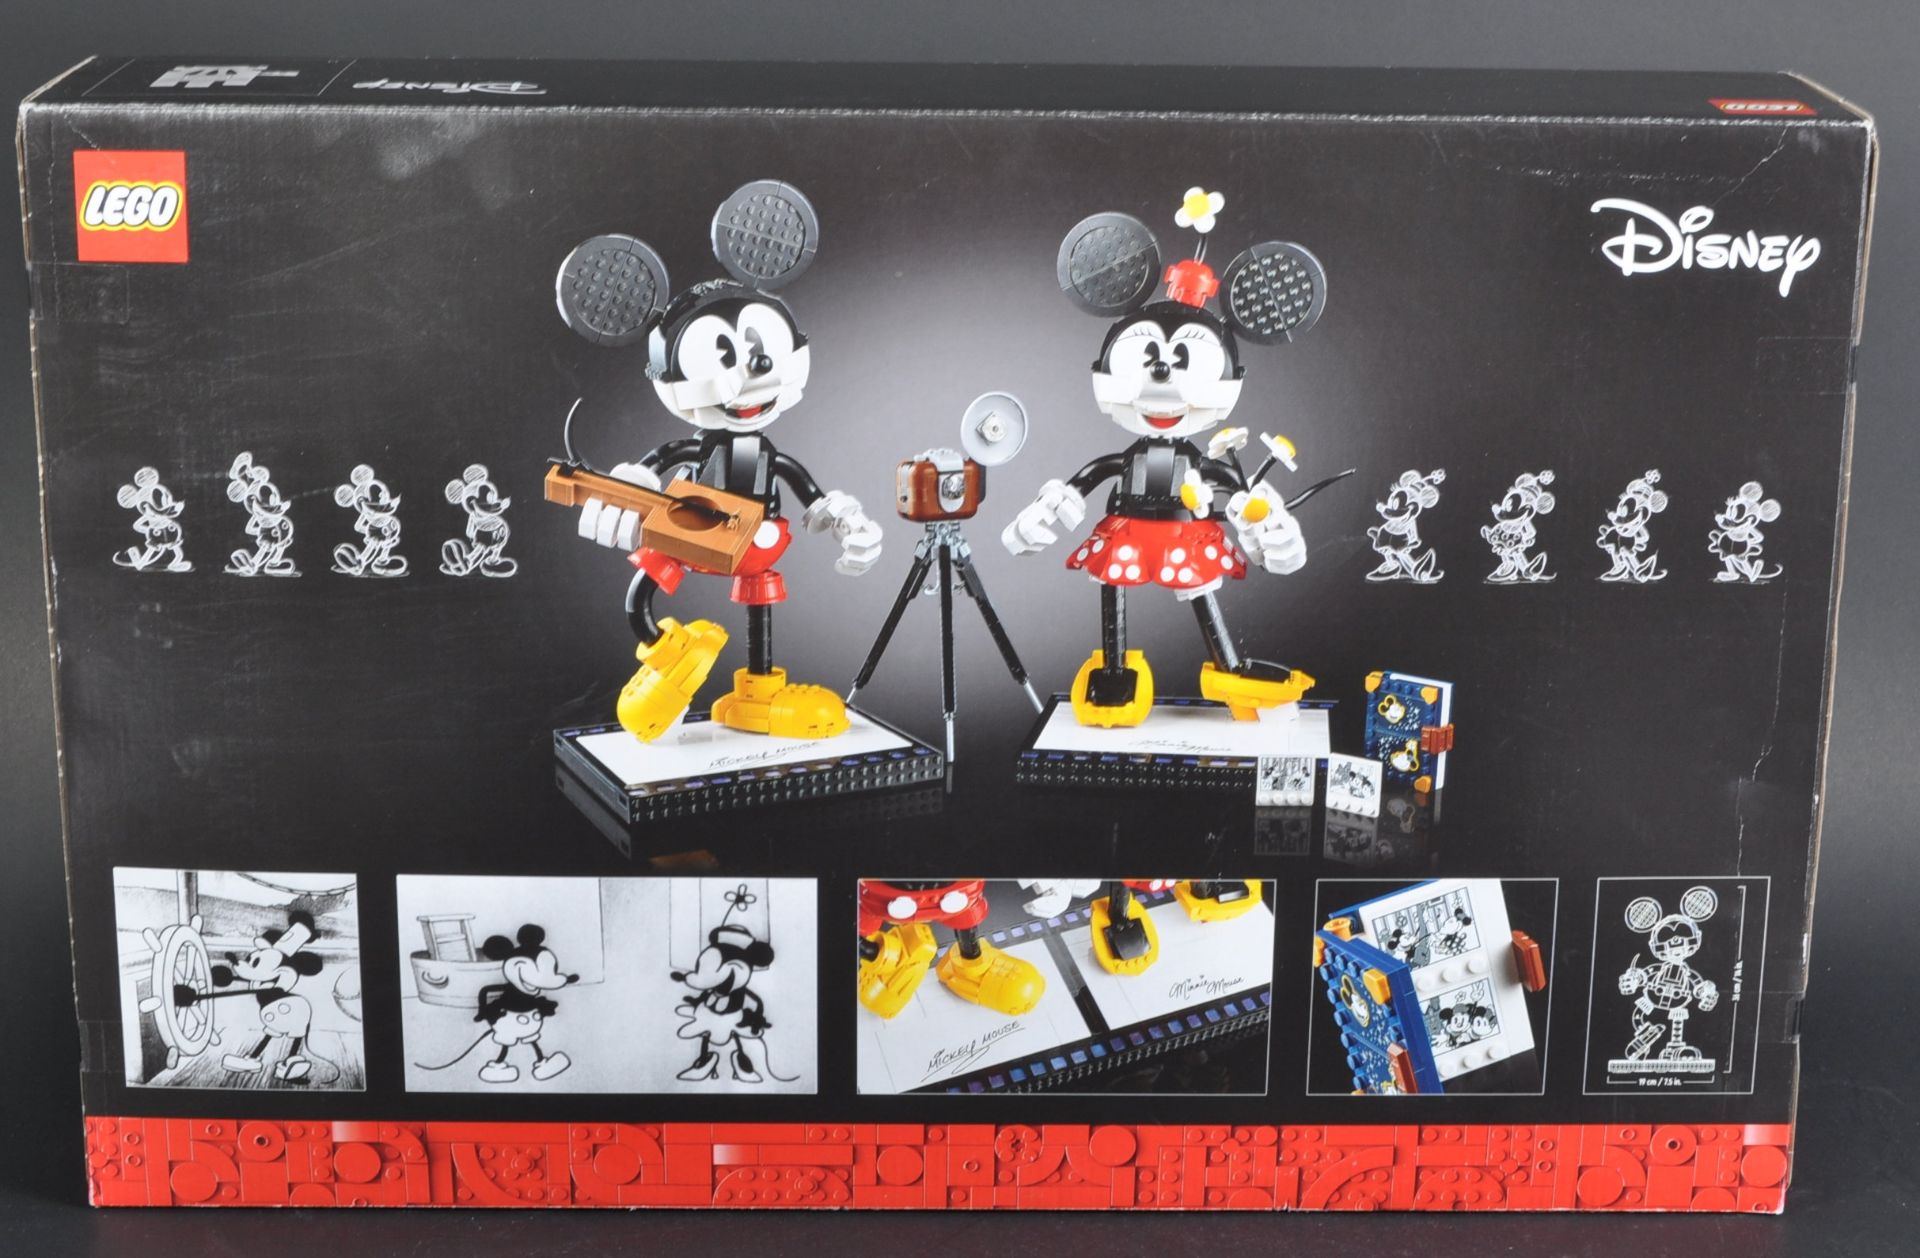 LEGO SET - DISNEY - 43179 - MICKY MOUSE & MINNIE MOUSE - Image 2 of 3